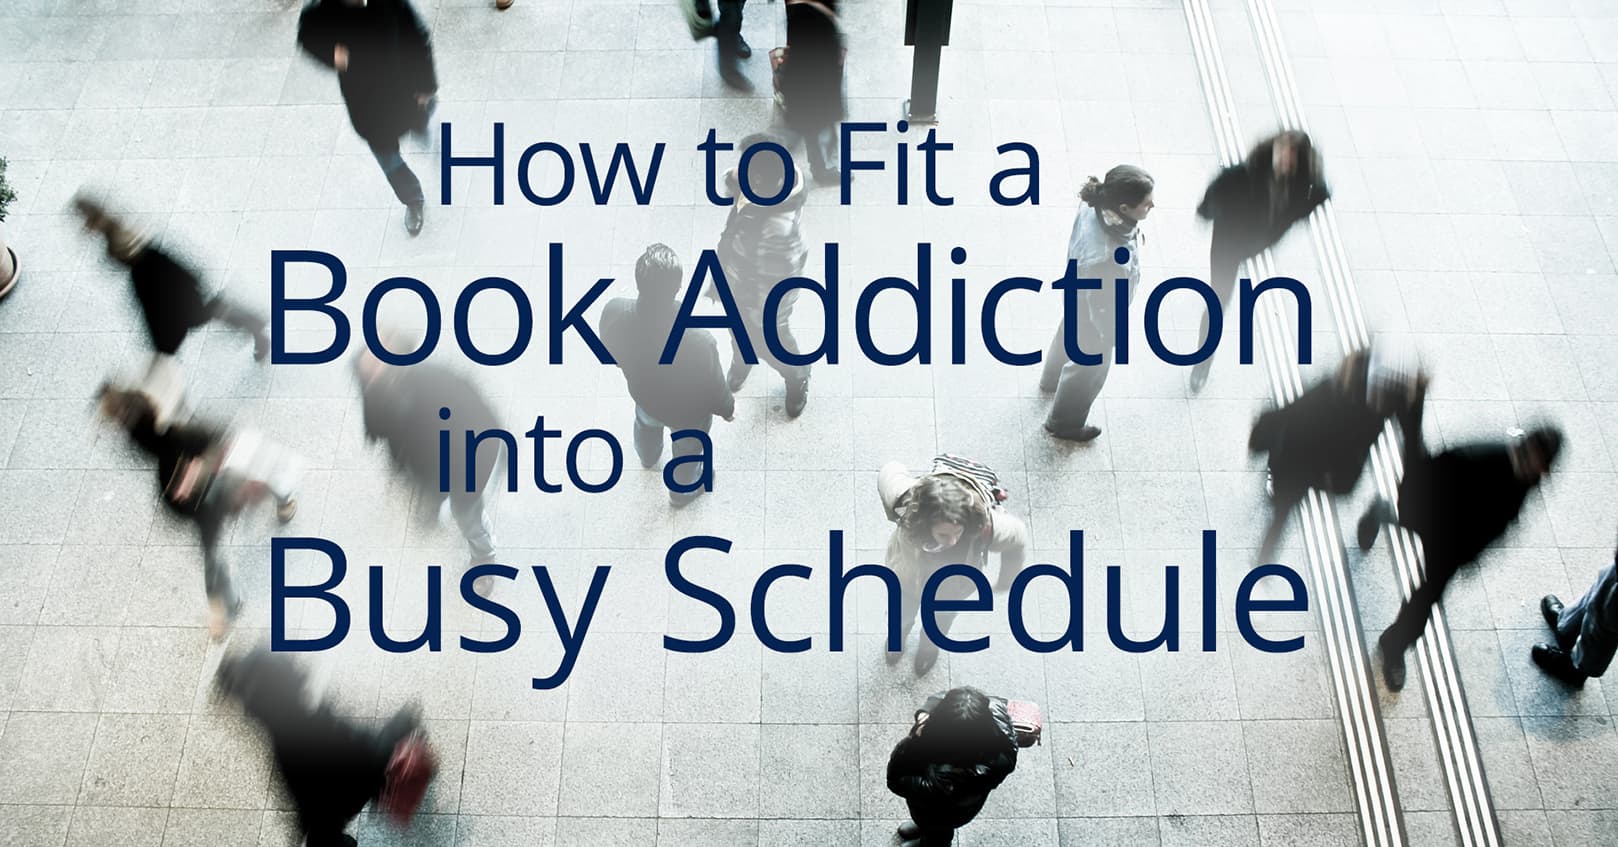 fit a book addiction into a busy schedule